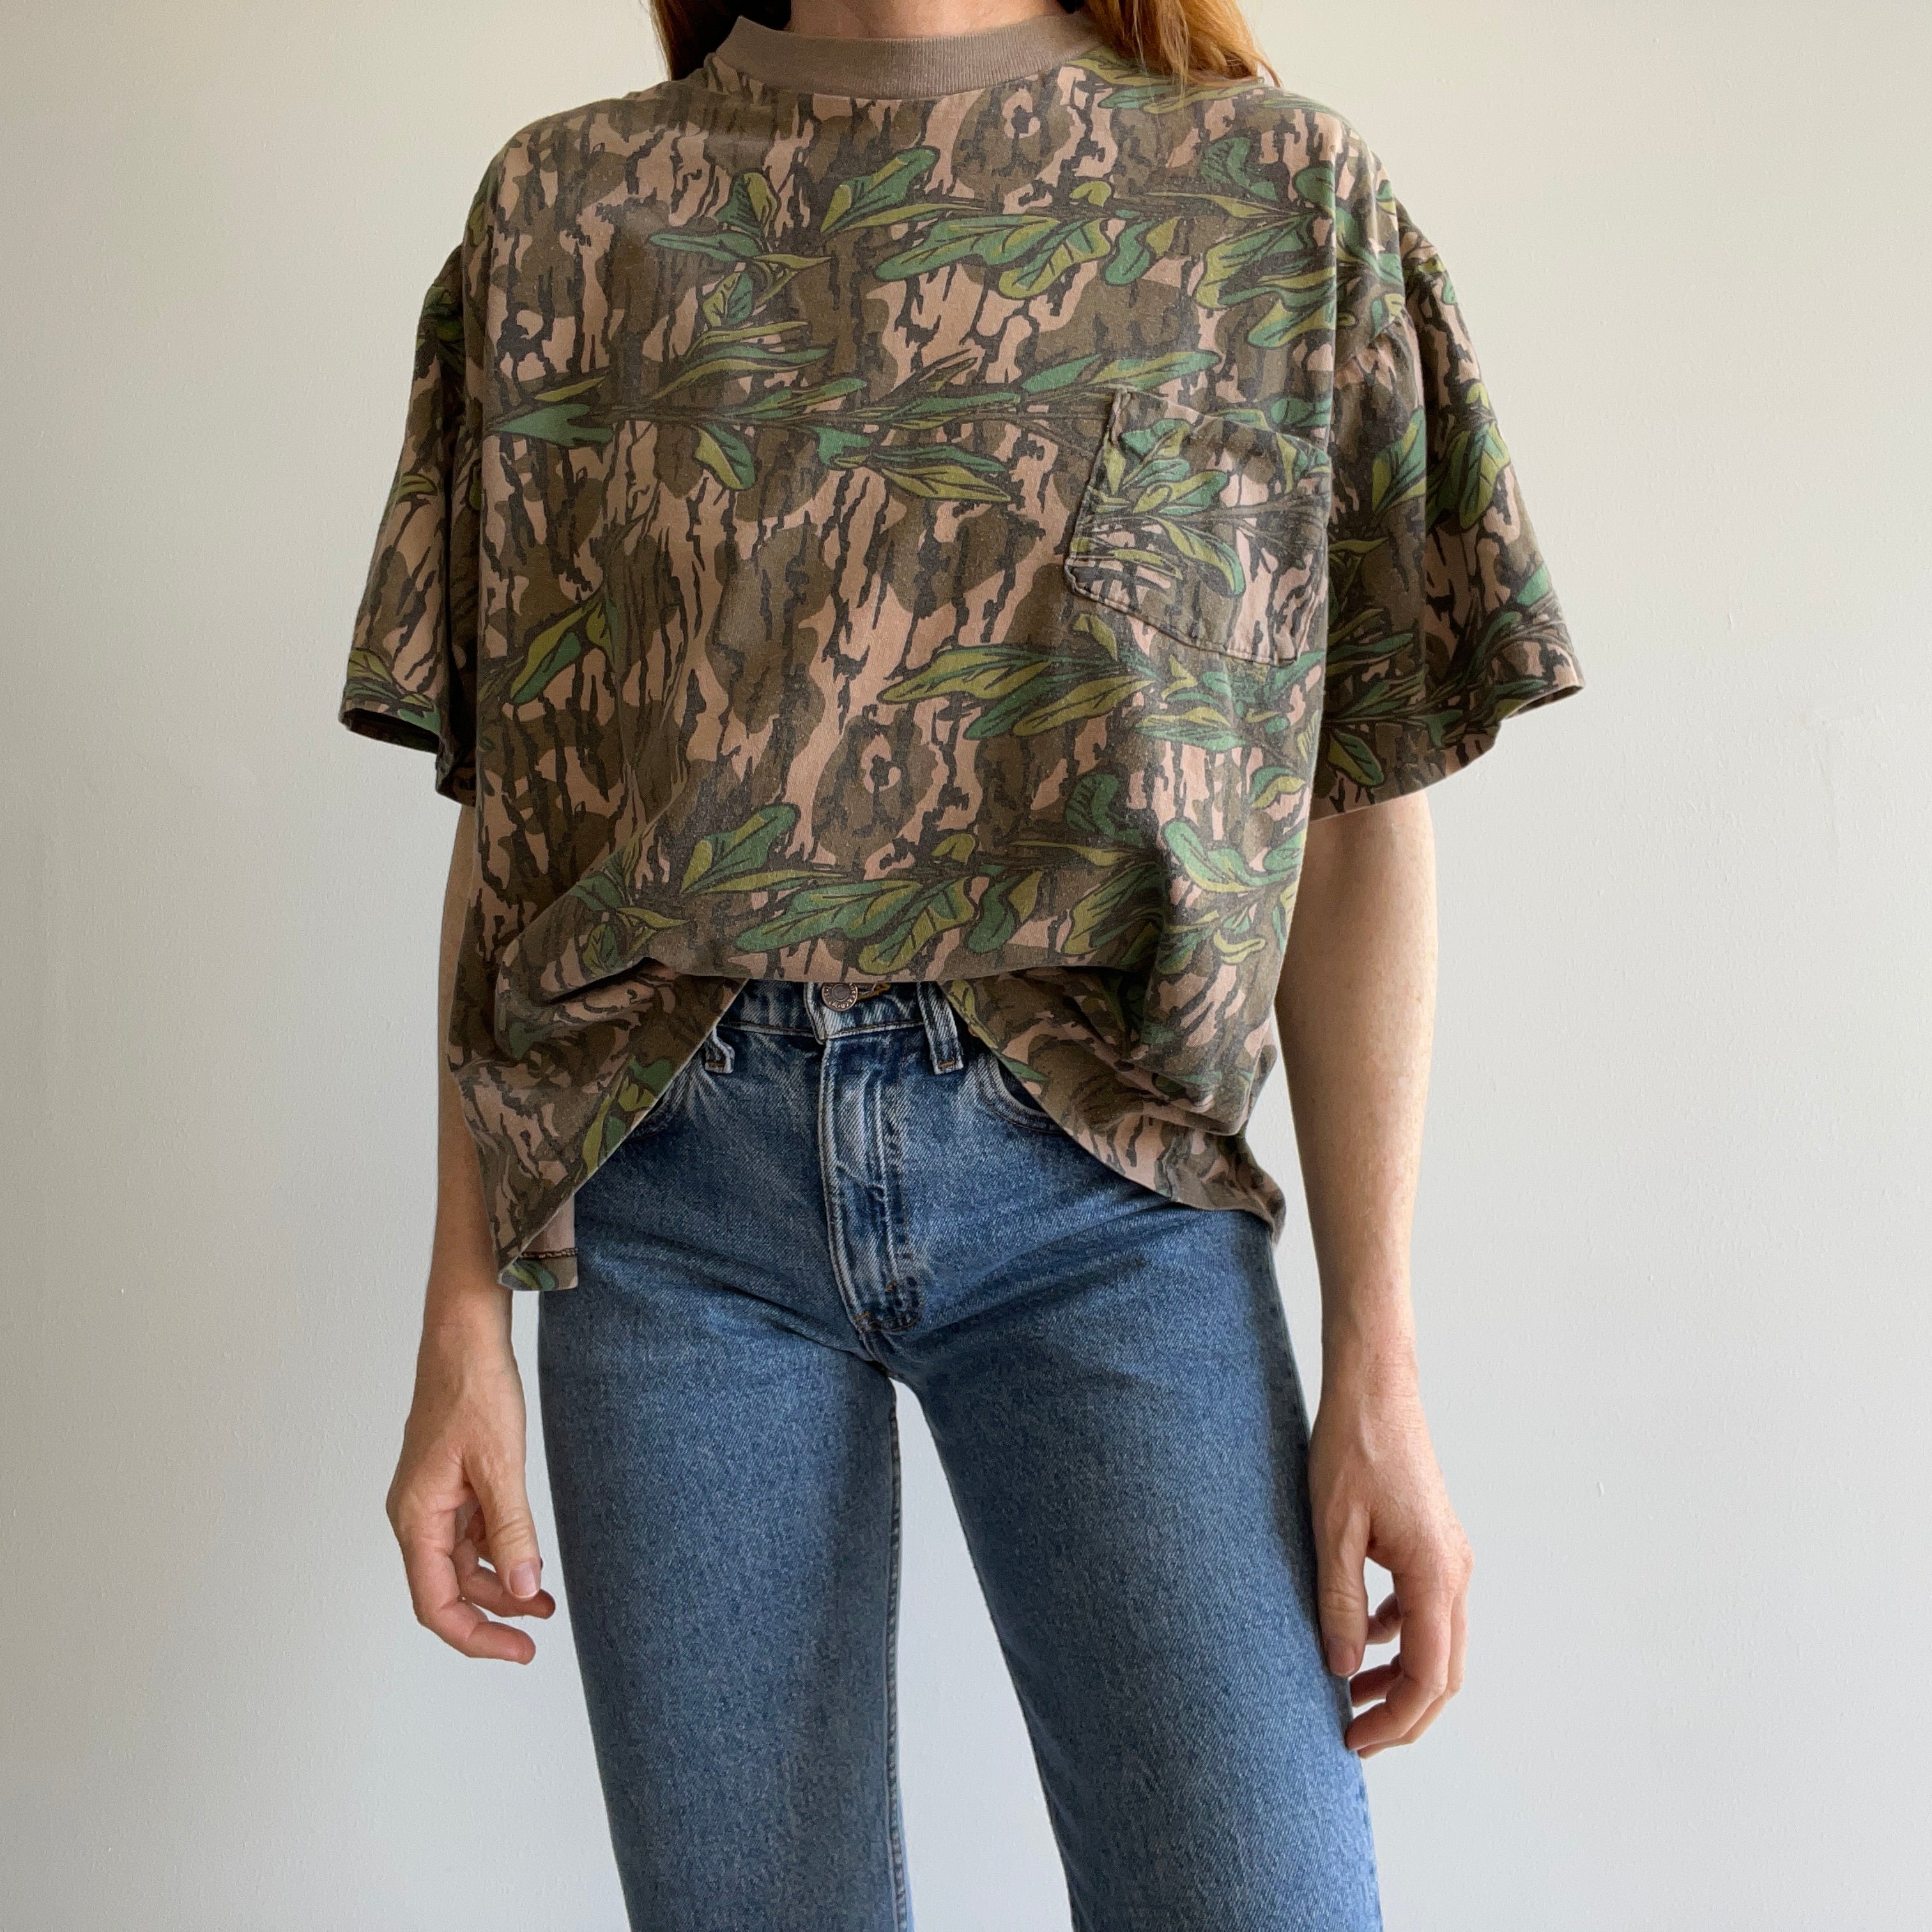 1990s Super Boxy Moss Oak Hunting Camo Pocket T-Shirt (Personal Collection)